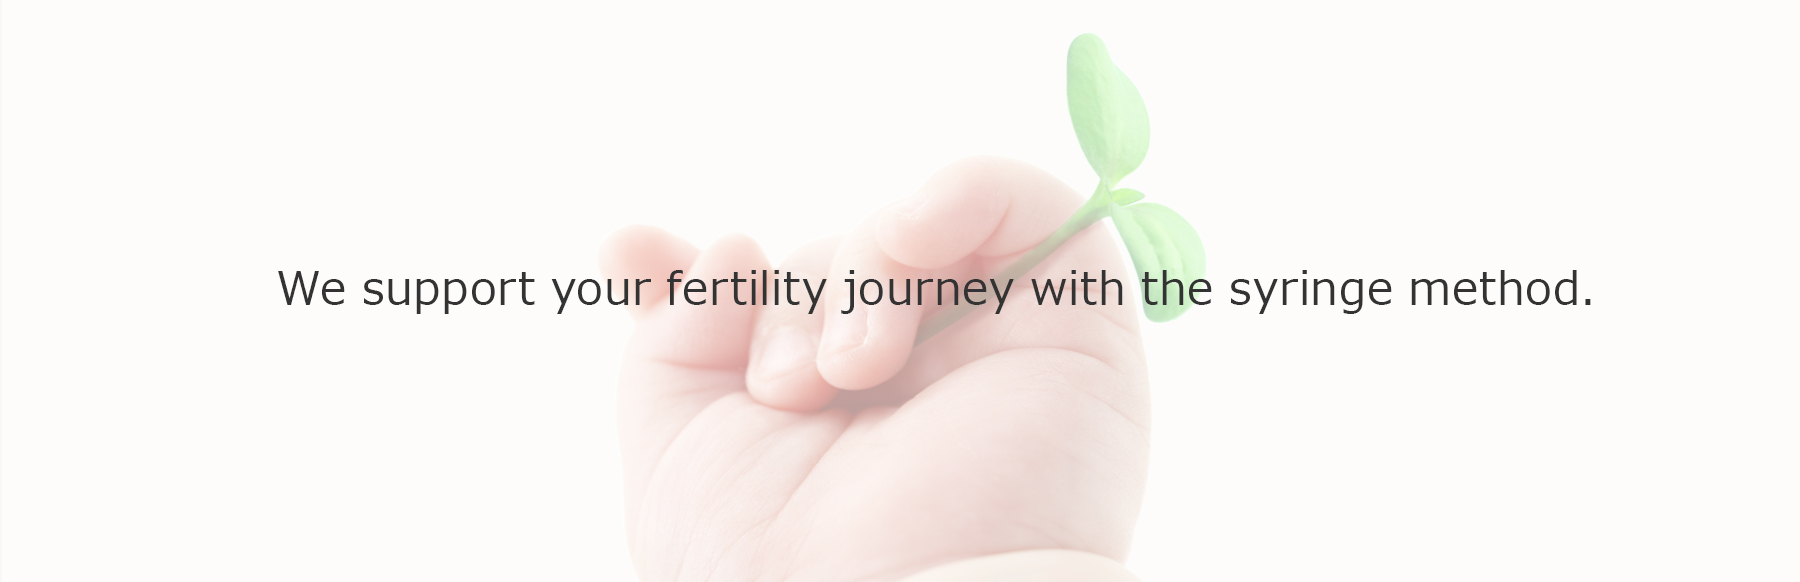 We support your fertility journey with the syringe method.